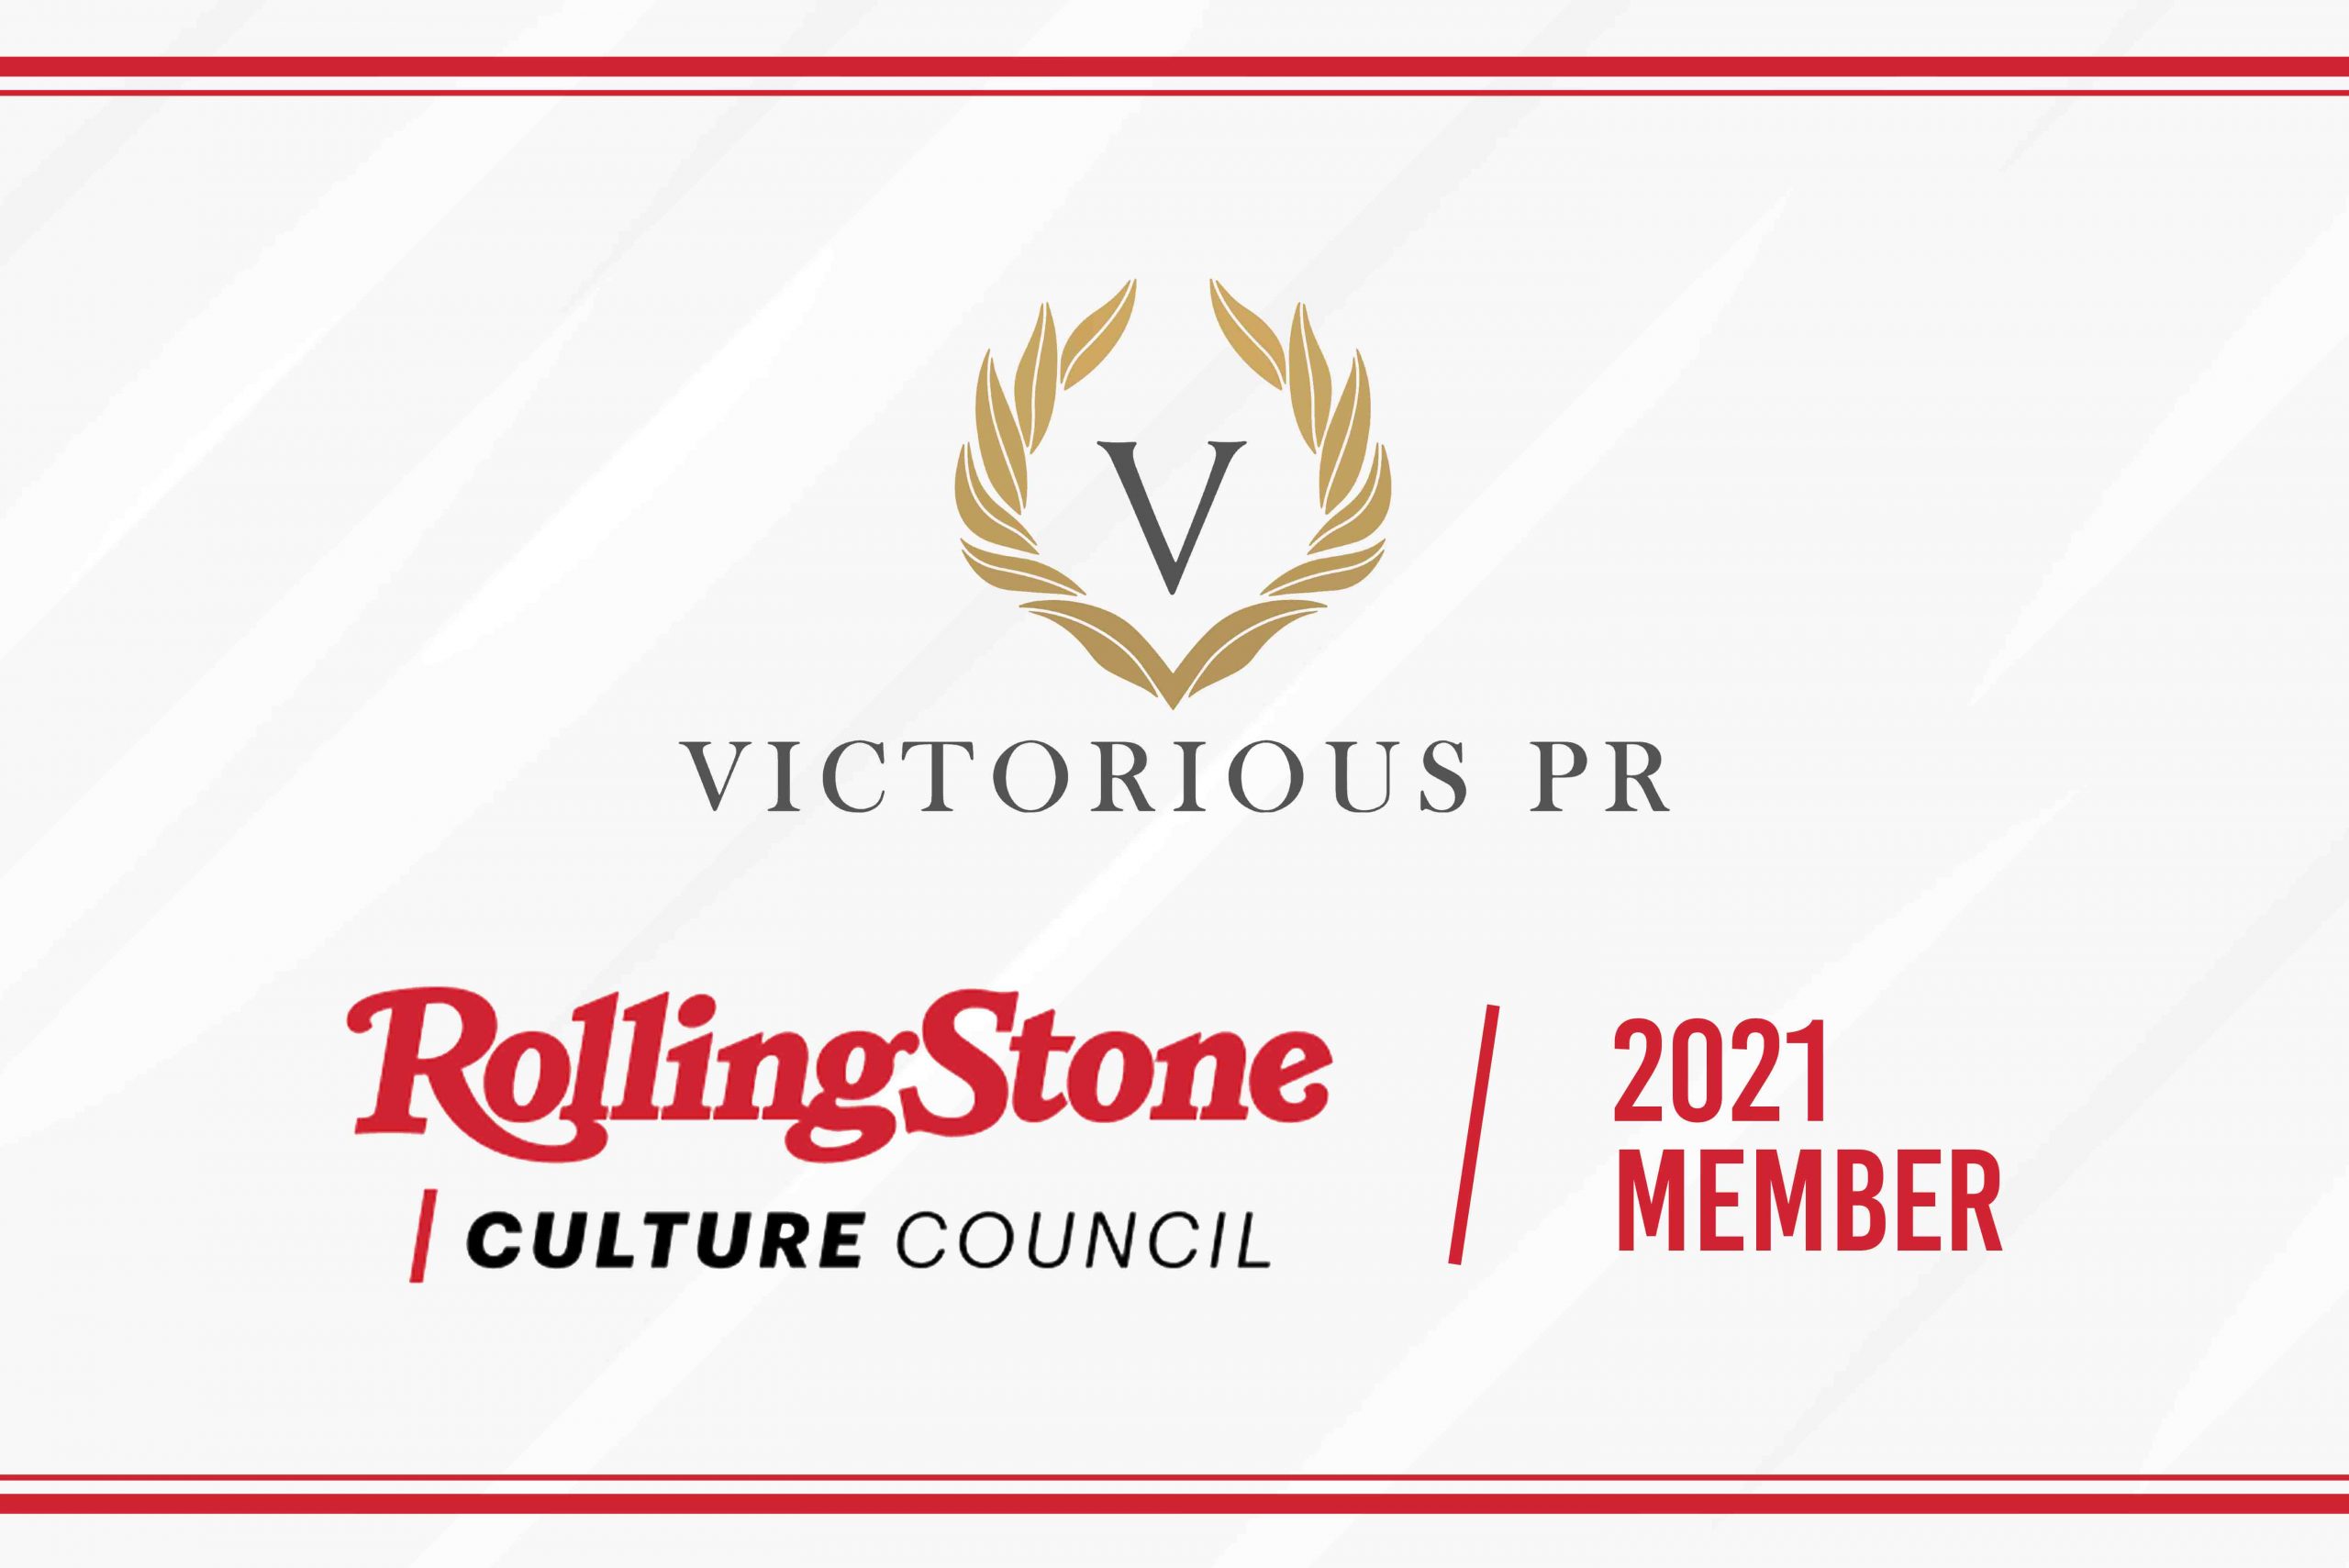 We Are Members of the Rolling Stone Culture Council!